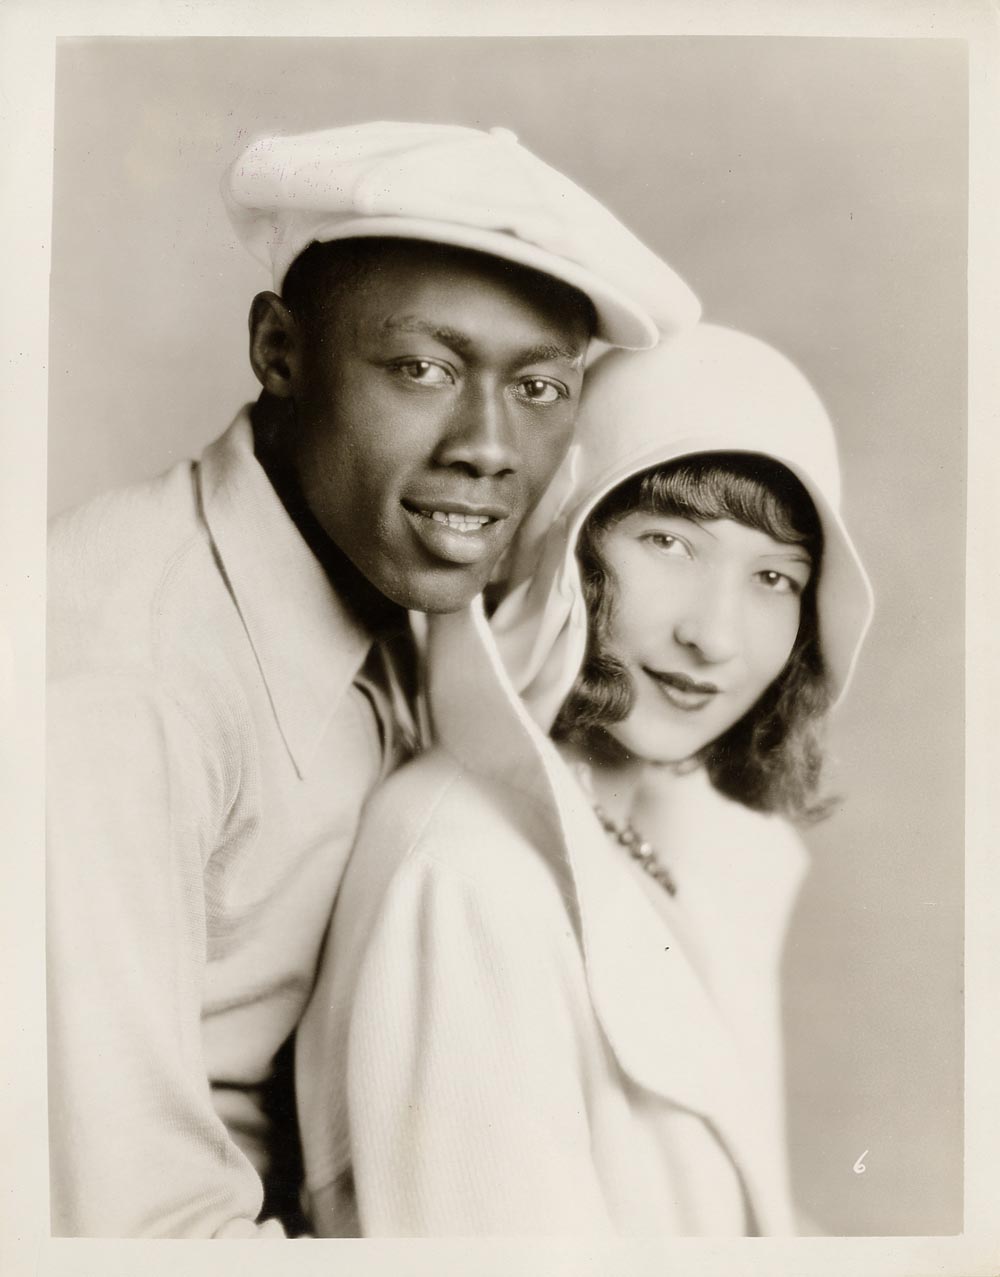 Lincoln Perry and his wife Dorothy Stevenson in 1929. Perry is the first black actor to receive a film credit, which he did in 1925. During most of his career, he played every typical black stereotype in film, but parlayed that into a successful career. In fact, he is also the first black actor to become a millionaire.